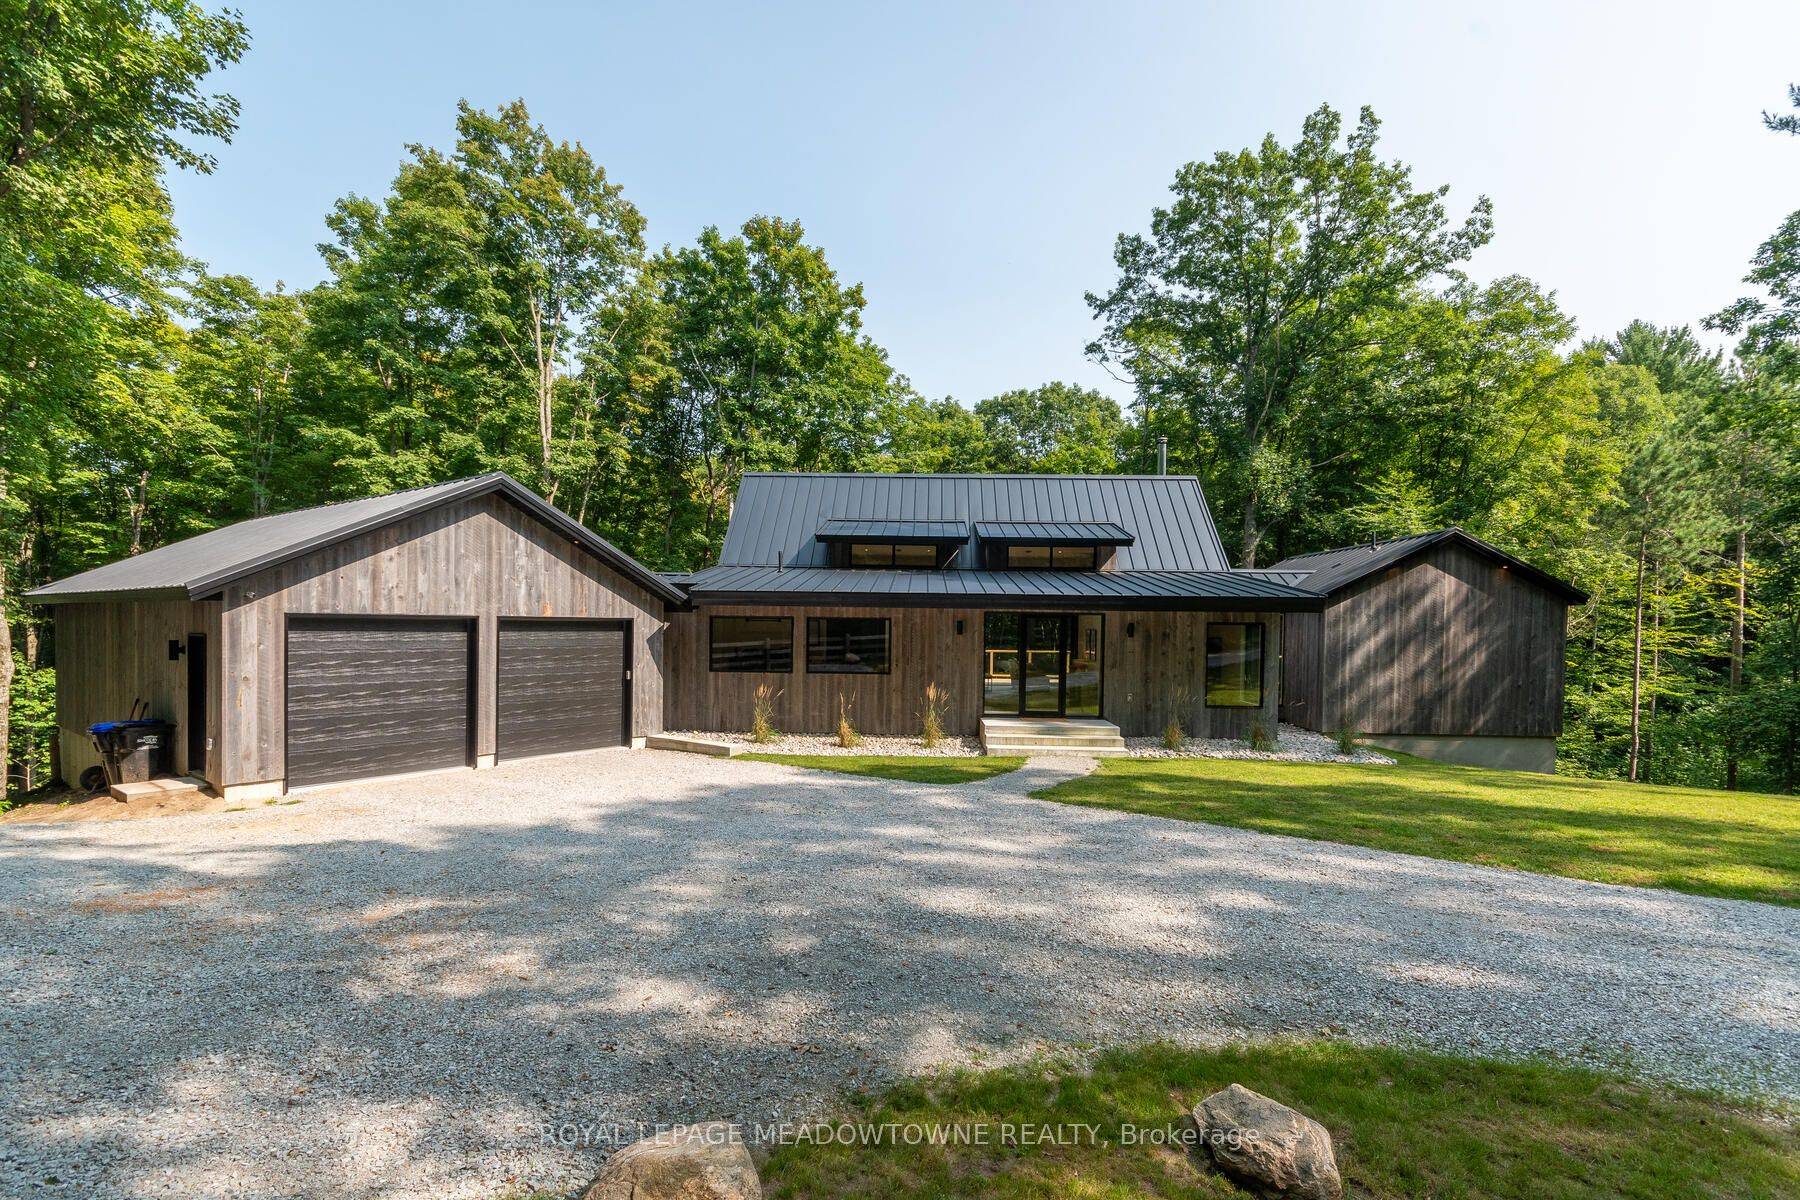 Unparalleled Craftsmanship Tucked Away on Almost 10 Wooded Acres Overlooking Your Private Ravine and 2km Hiking Trail.